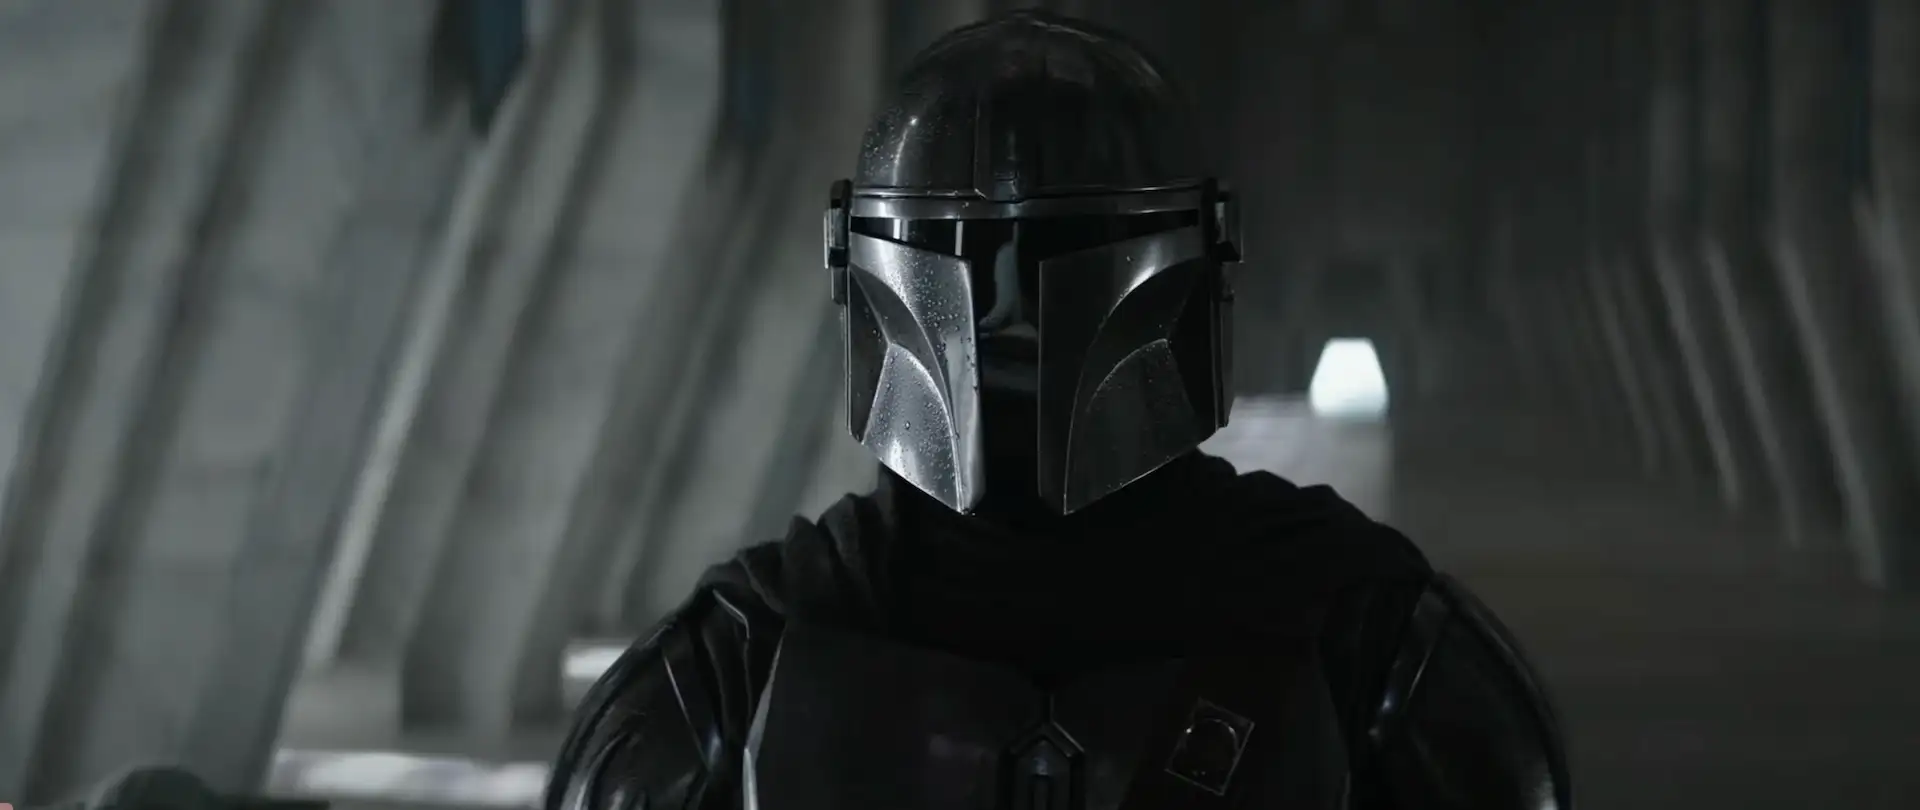 The Mandalorian 3 Episodes Released: New Trailer